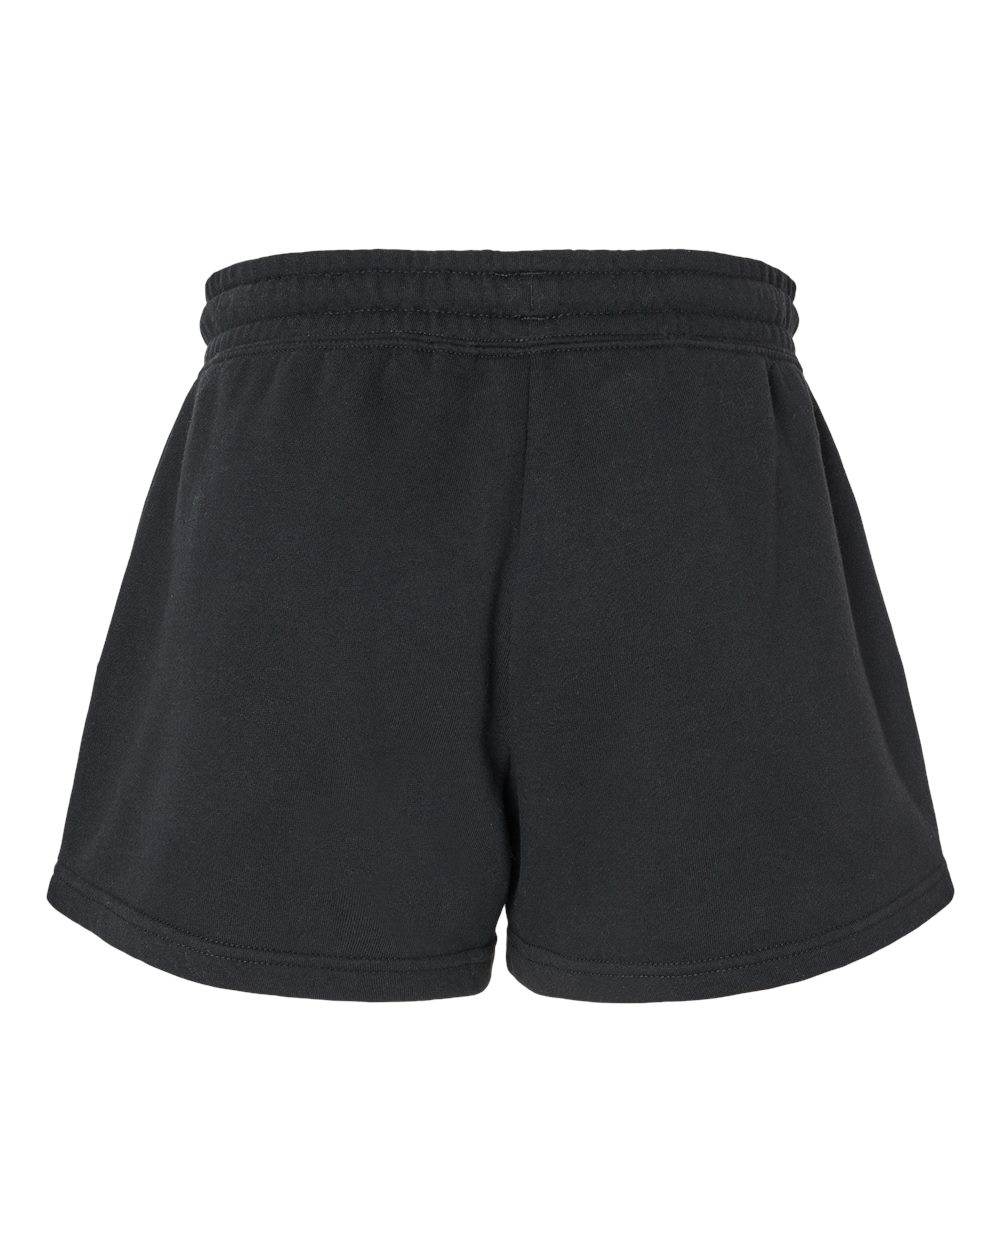 Samickarr Summer Savings Clearance!Sweat Shorts For Women'S Solid